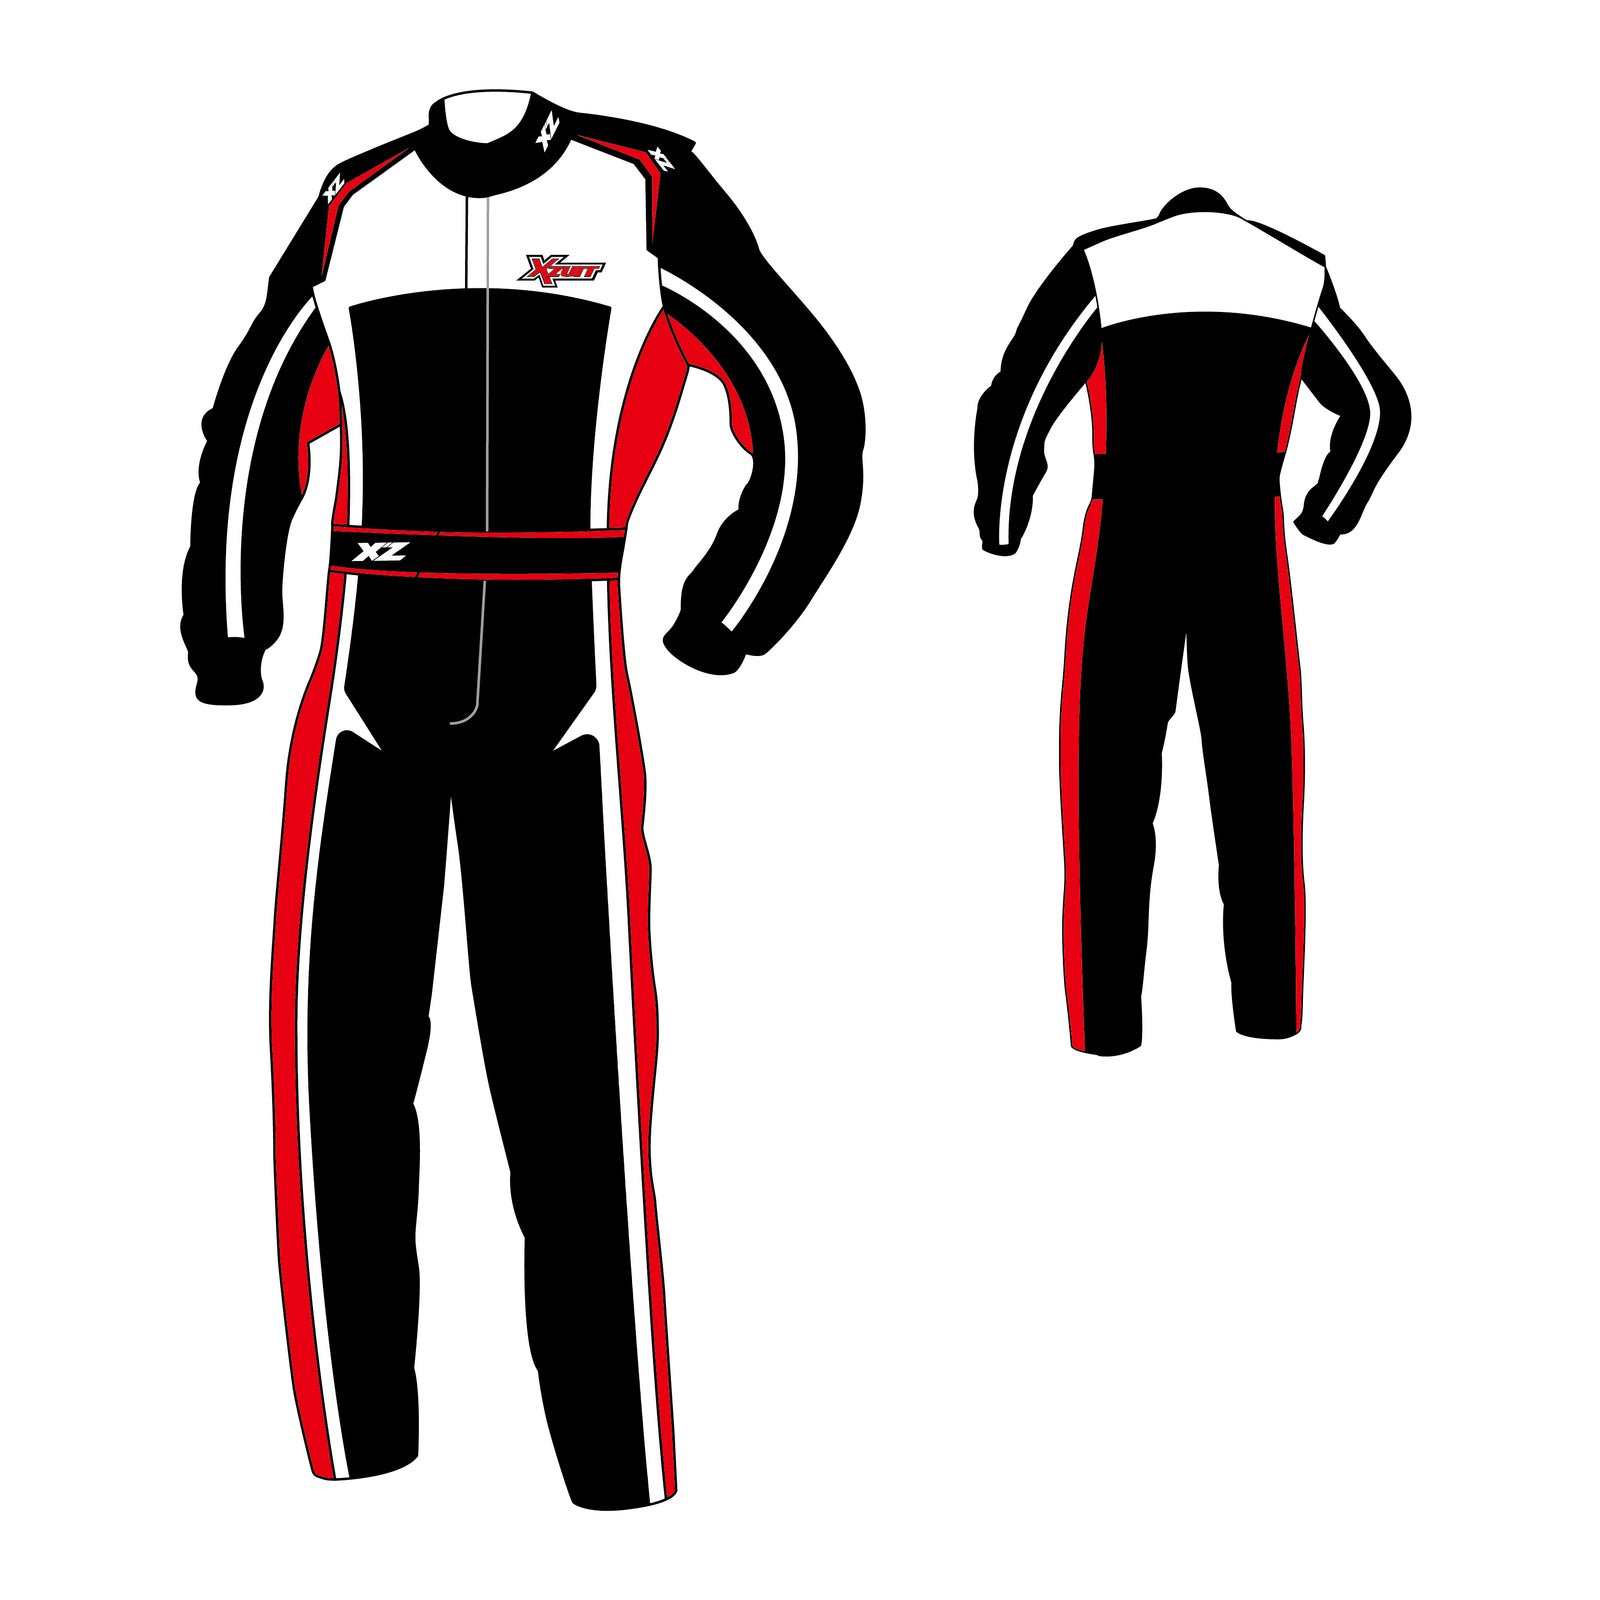 Men's race suit made with fire resistant material that is in compliance with FIA 8856-2000 regulation